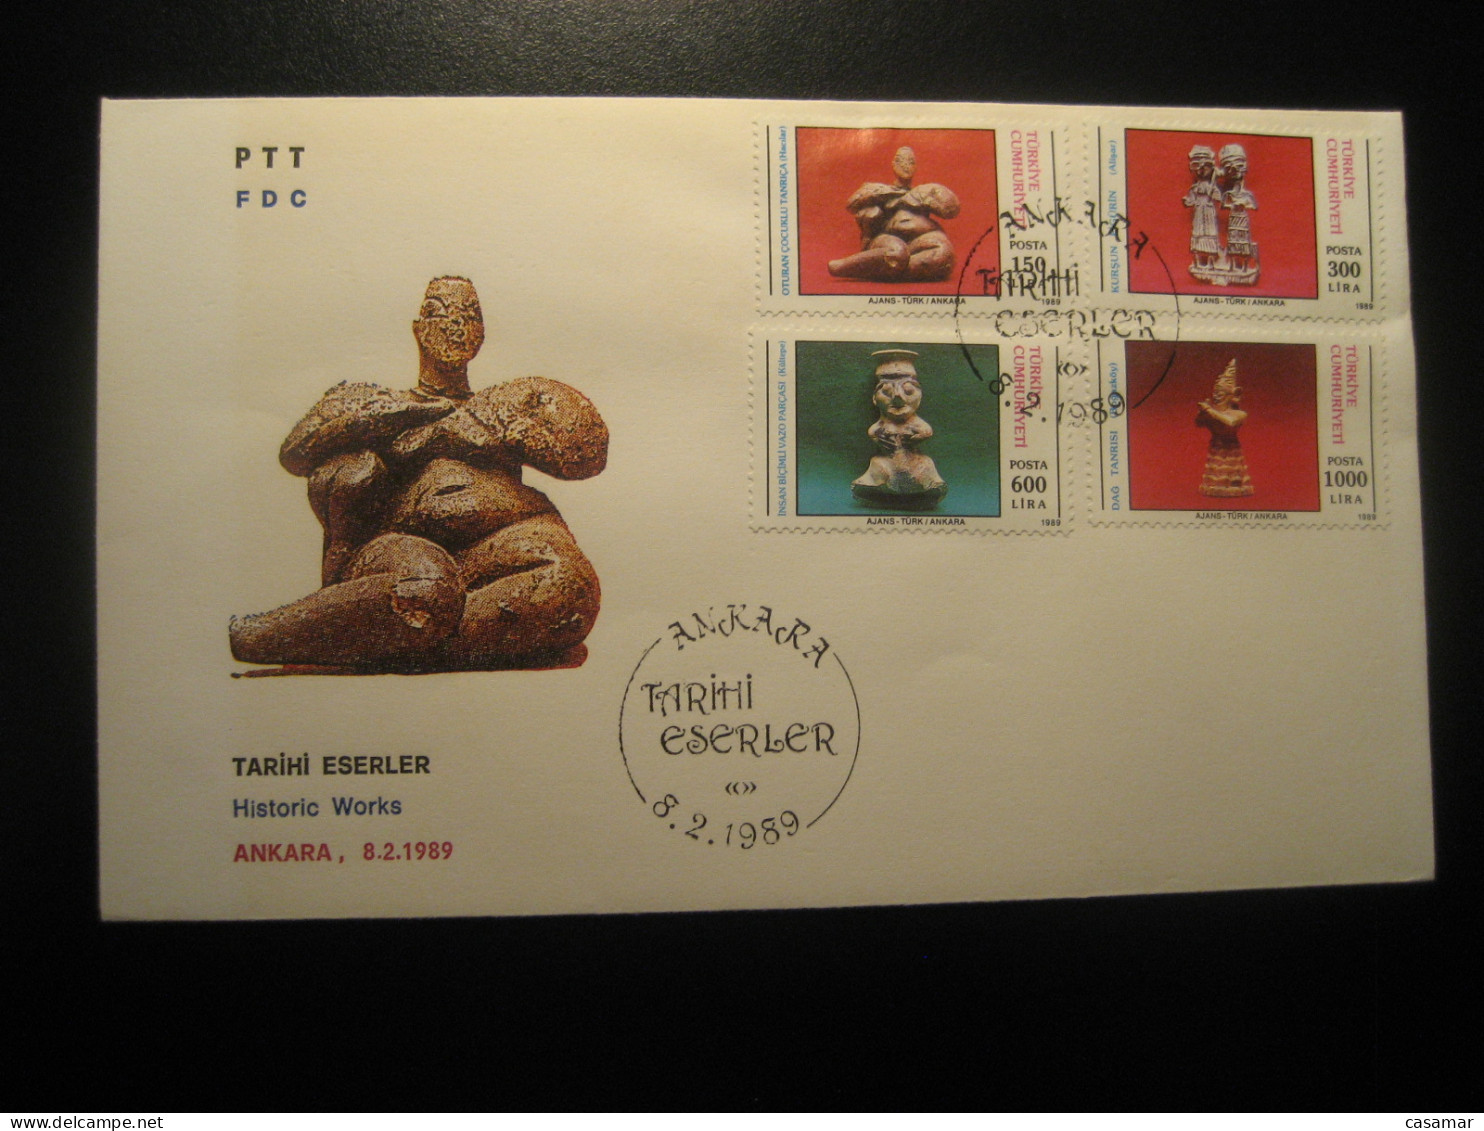 ANKARA 1989 Historic Works FDC Cancel Cover TURKEY - Covers & Documents